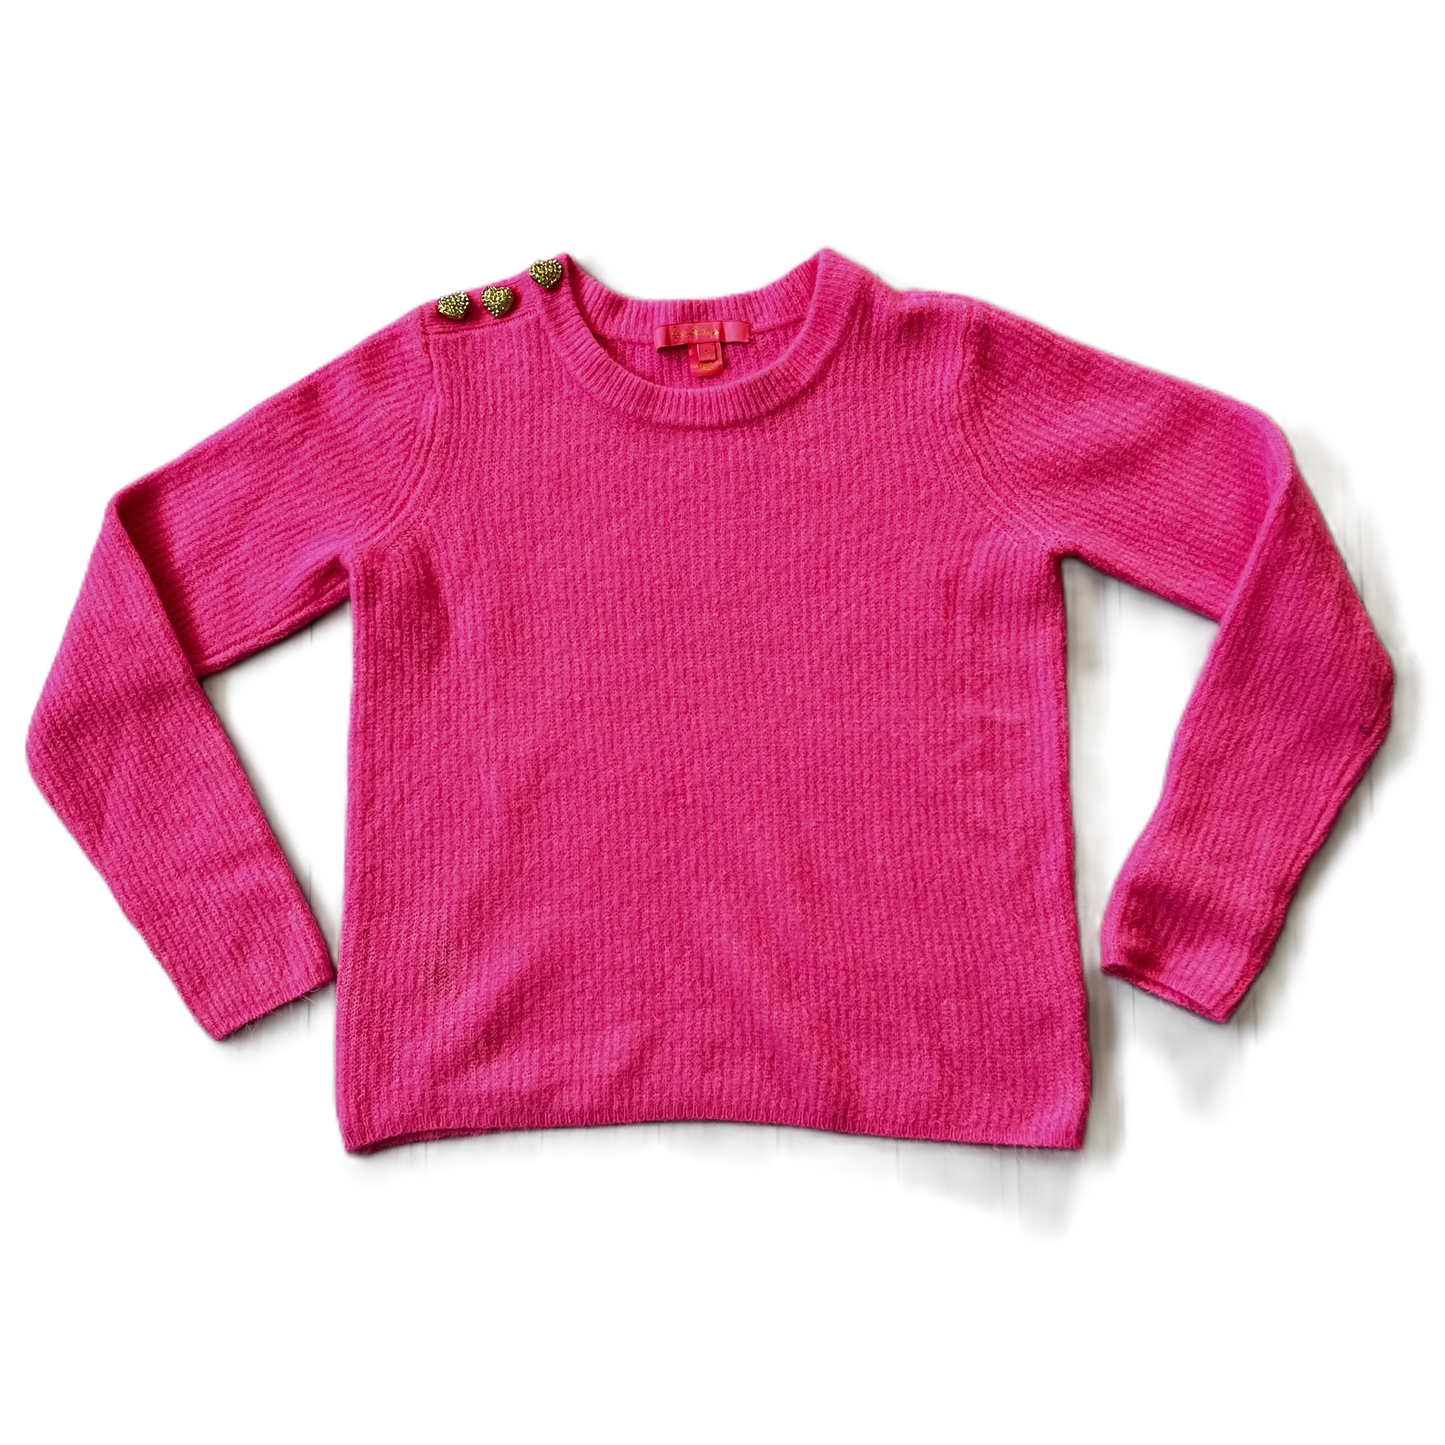 Pink Sweater By Lilly Pulitzer, Size: S